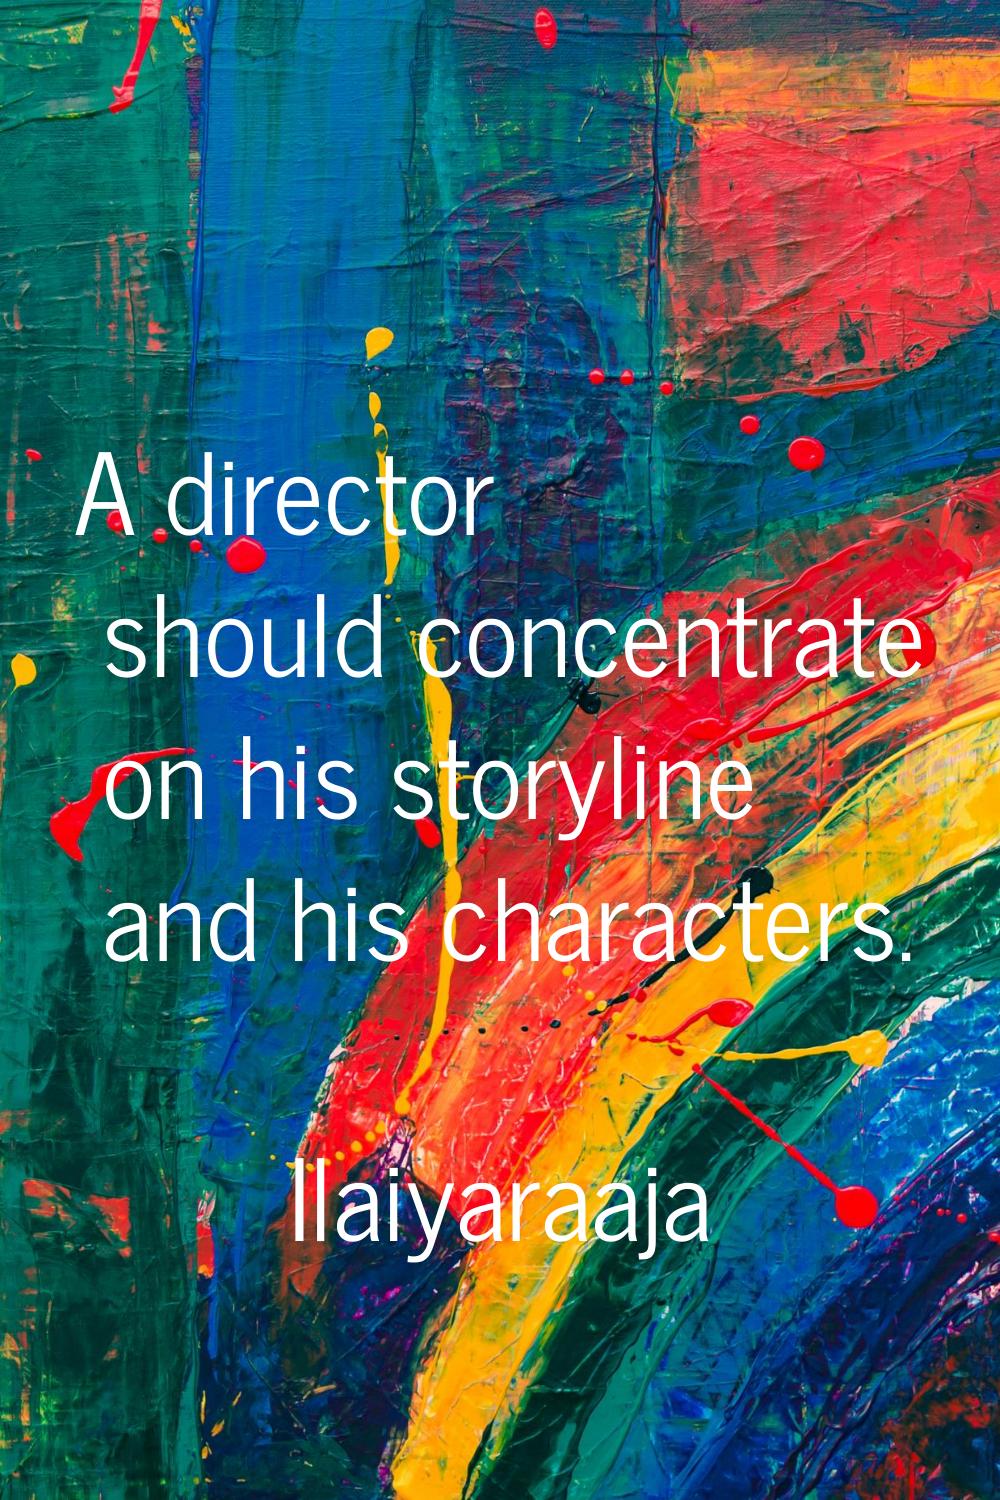 A director should concentrate on his storyline and his characters.